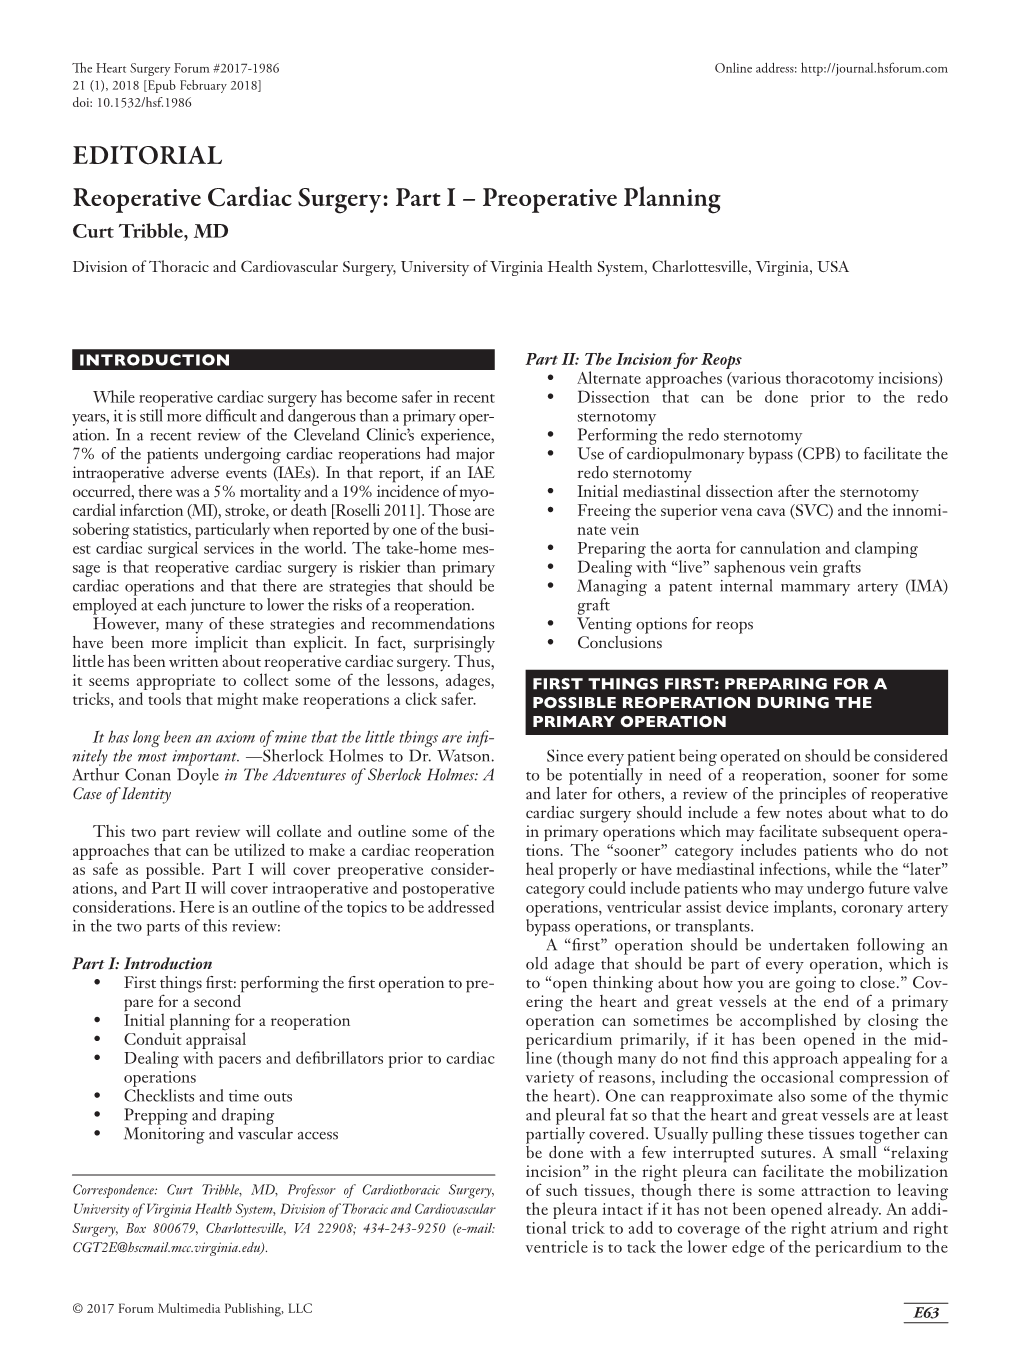 EDITORIAL Reoperative Cardiac Surgery: Part I – Preoperative Planning Curt Tribble, MD